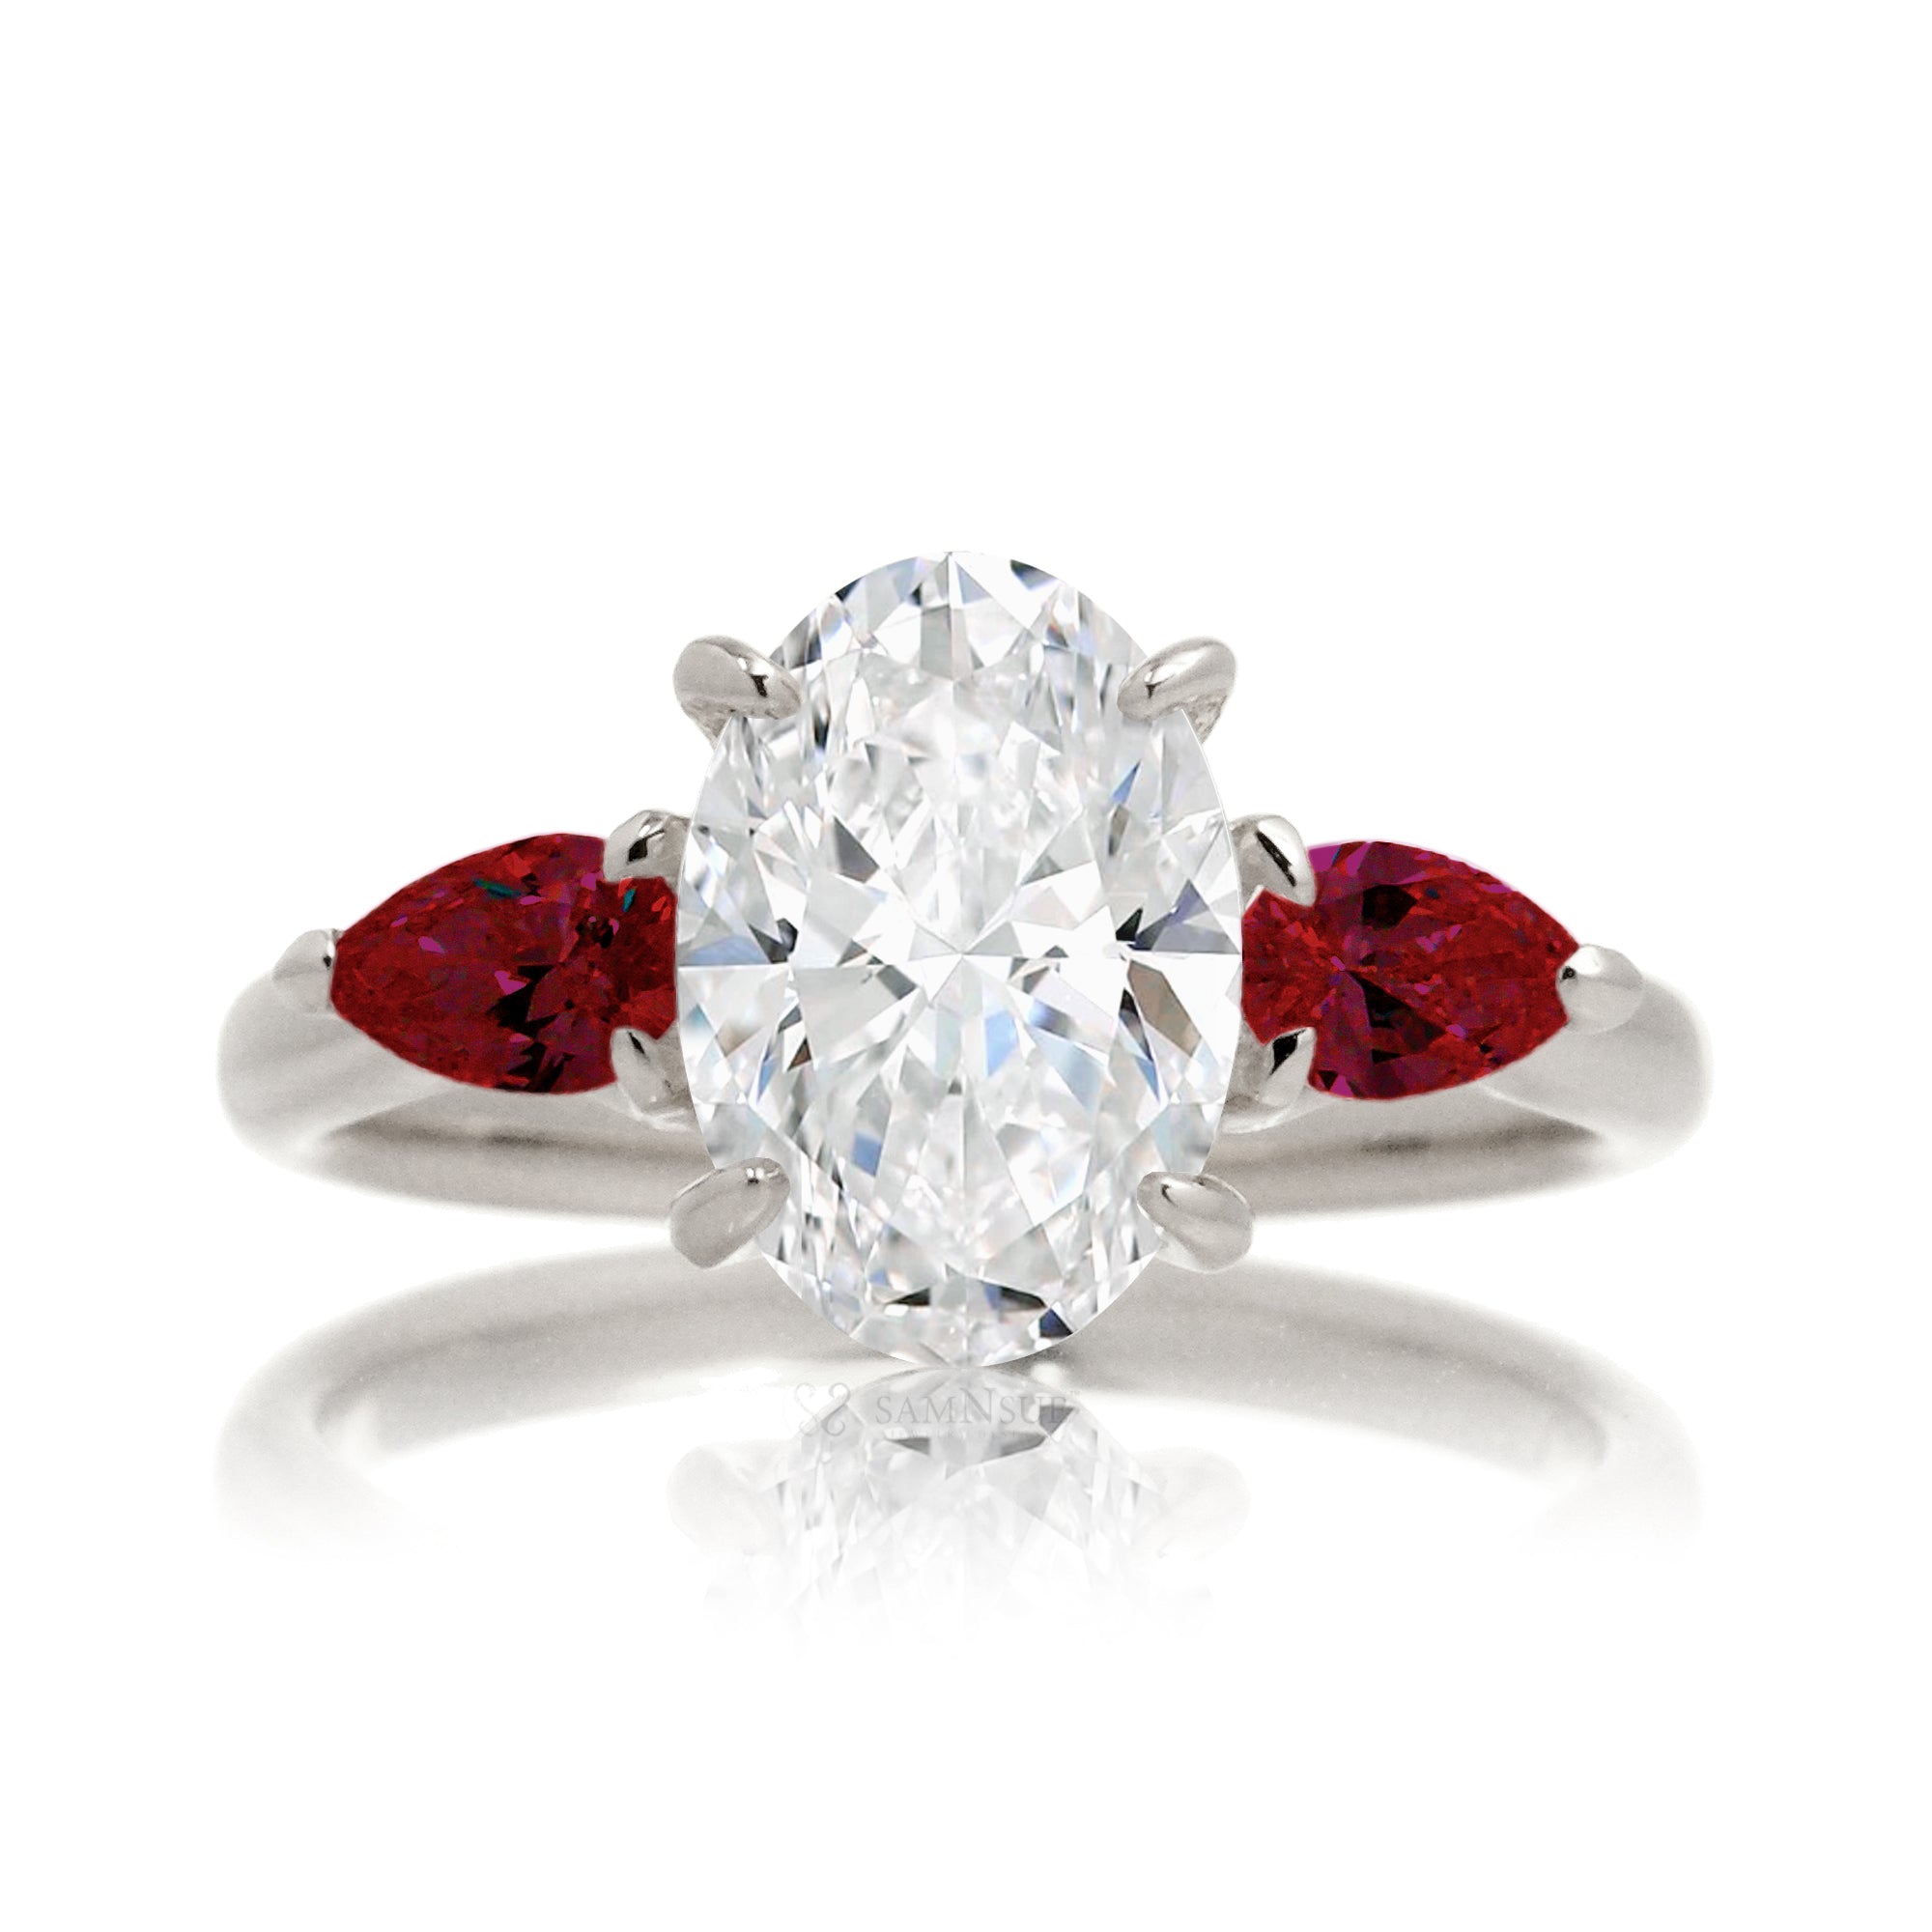 Three-stone pear ruby and oval cut diamond engagement ring white gold